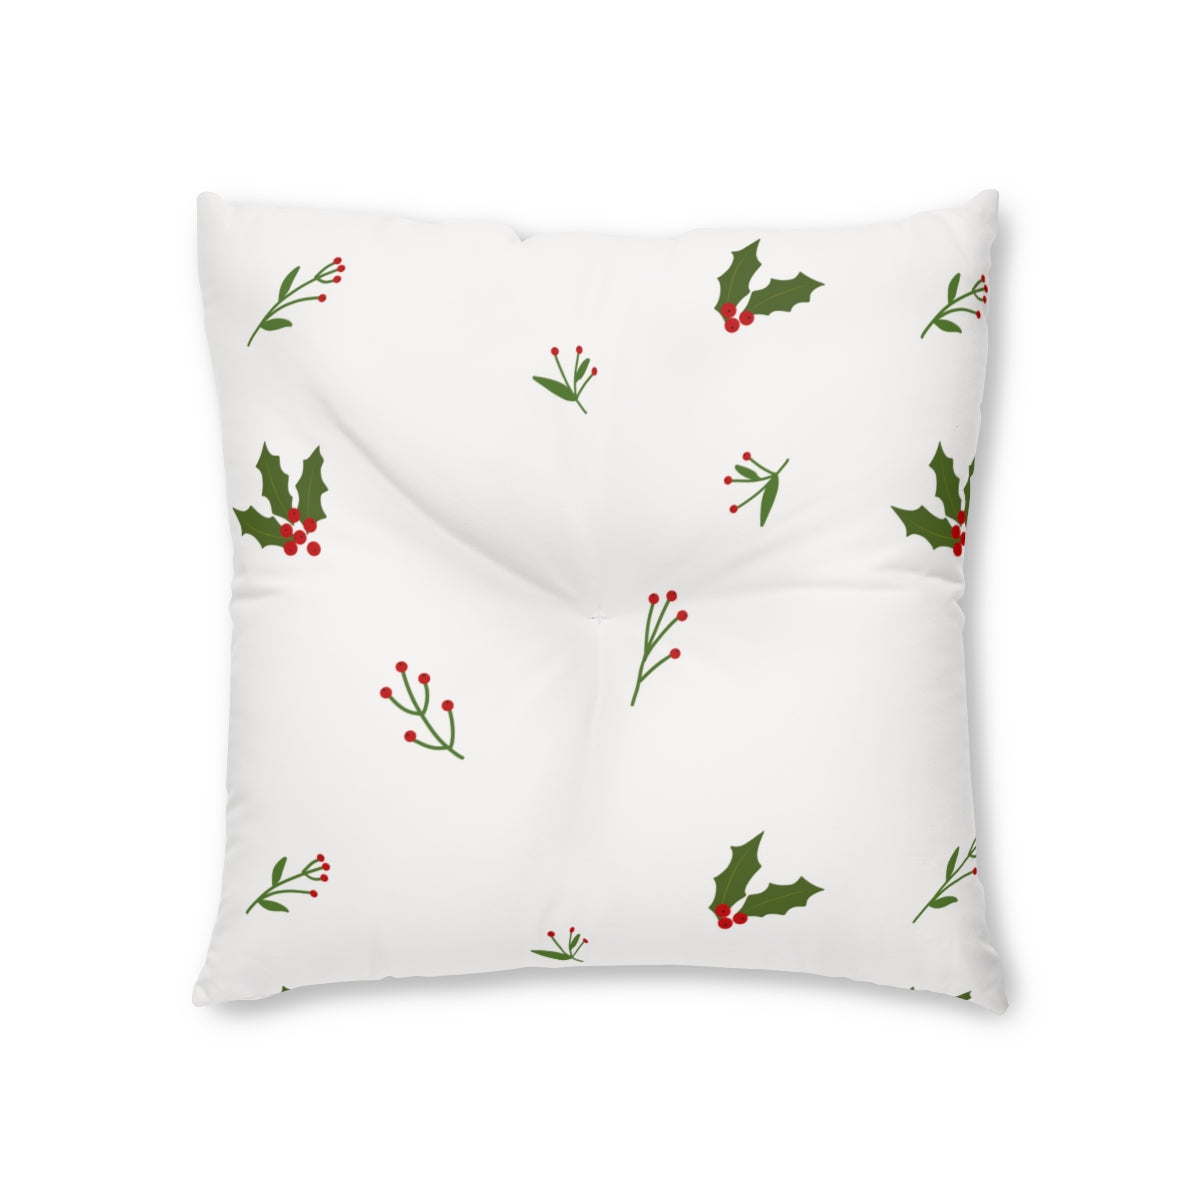 Lifestyle Details - White Square Tufted Holiday Floor Pillow - Holly - 26x26 - Front View